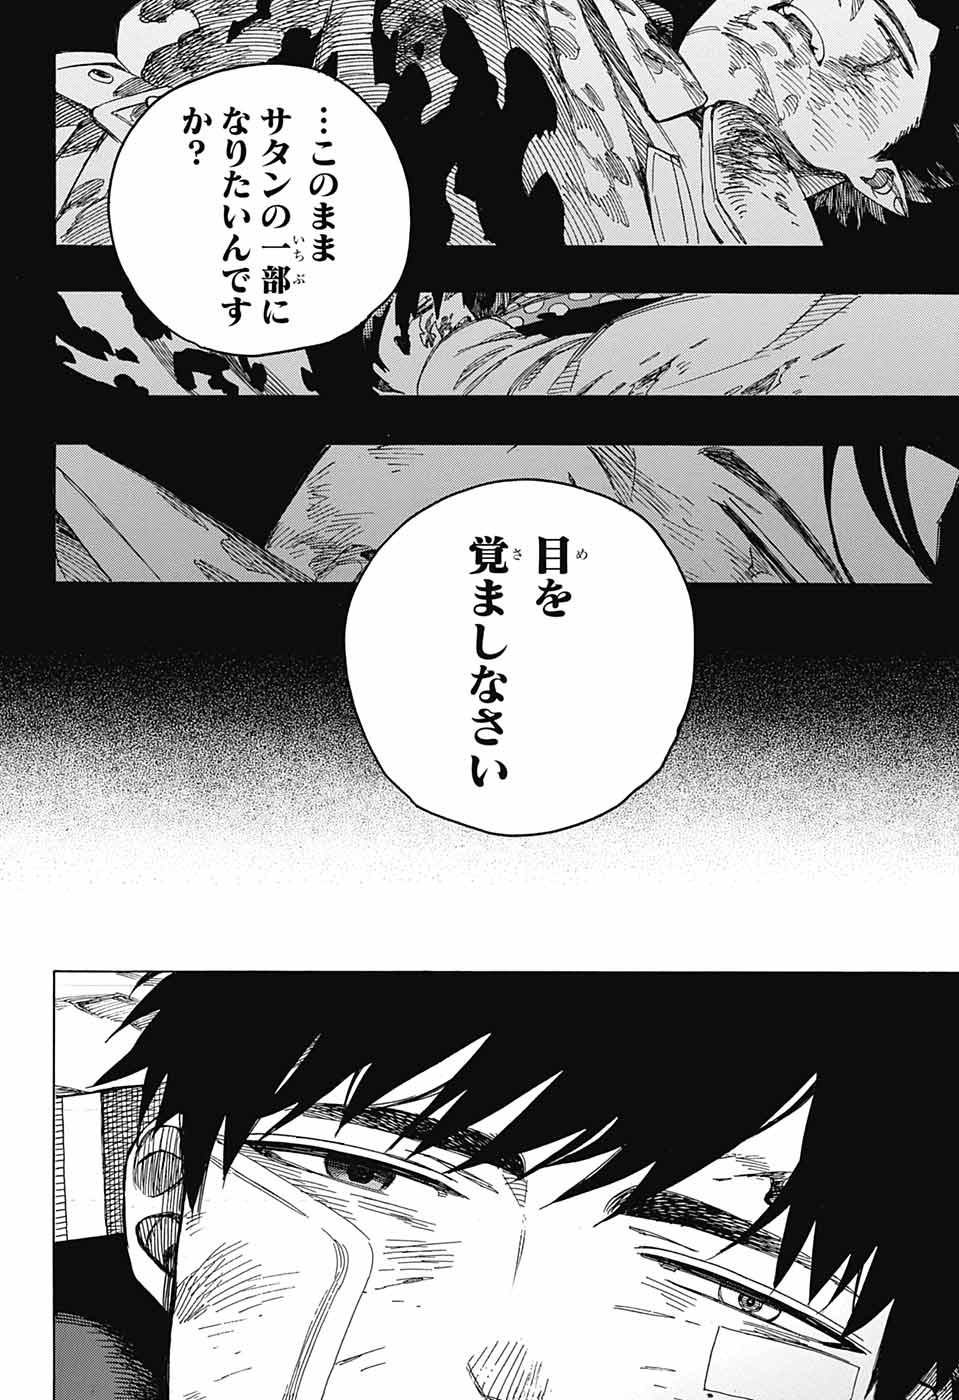 Ao no Exorcist - Chapter 141 - Page 2